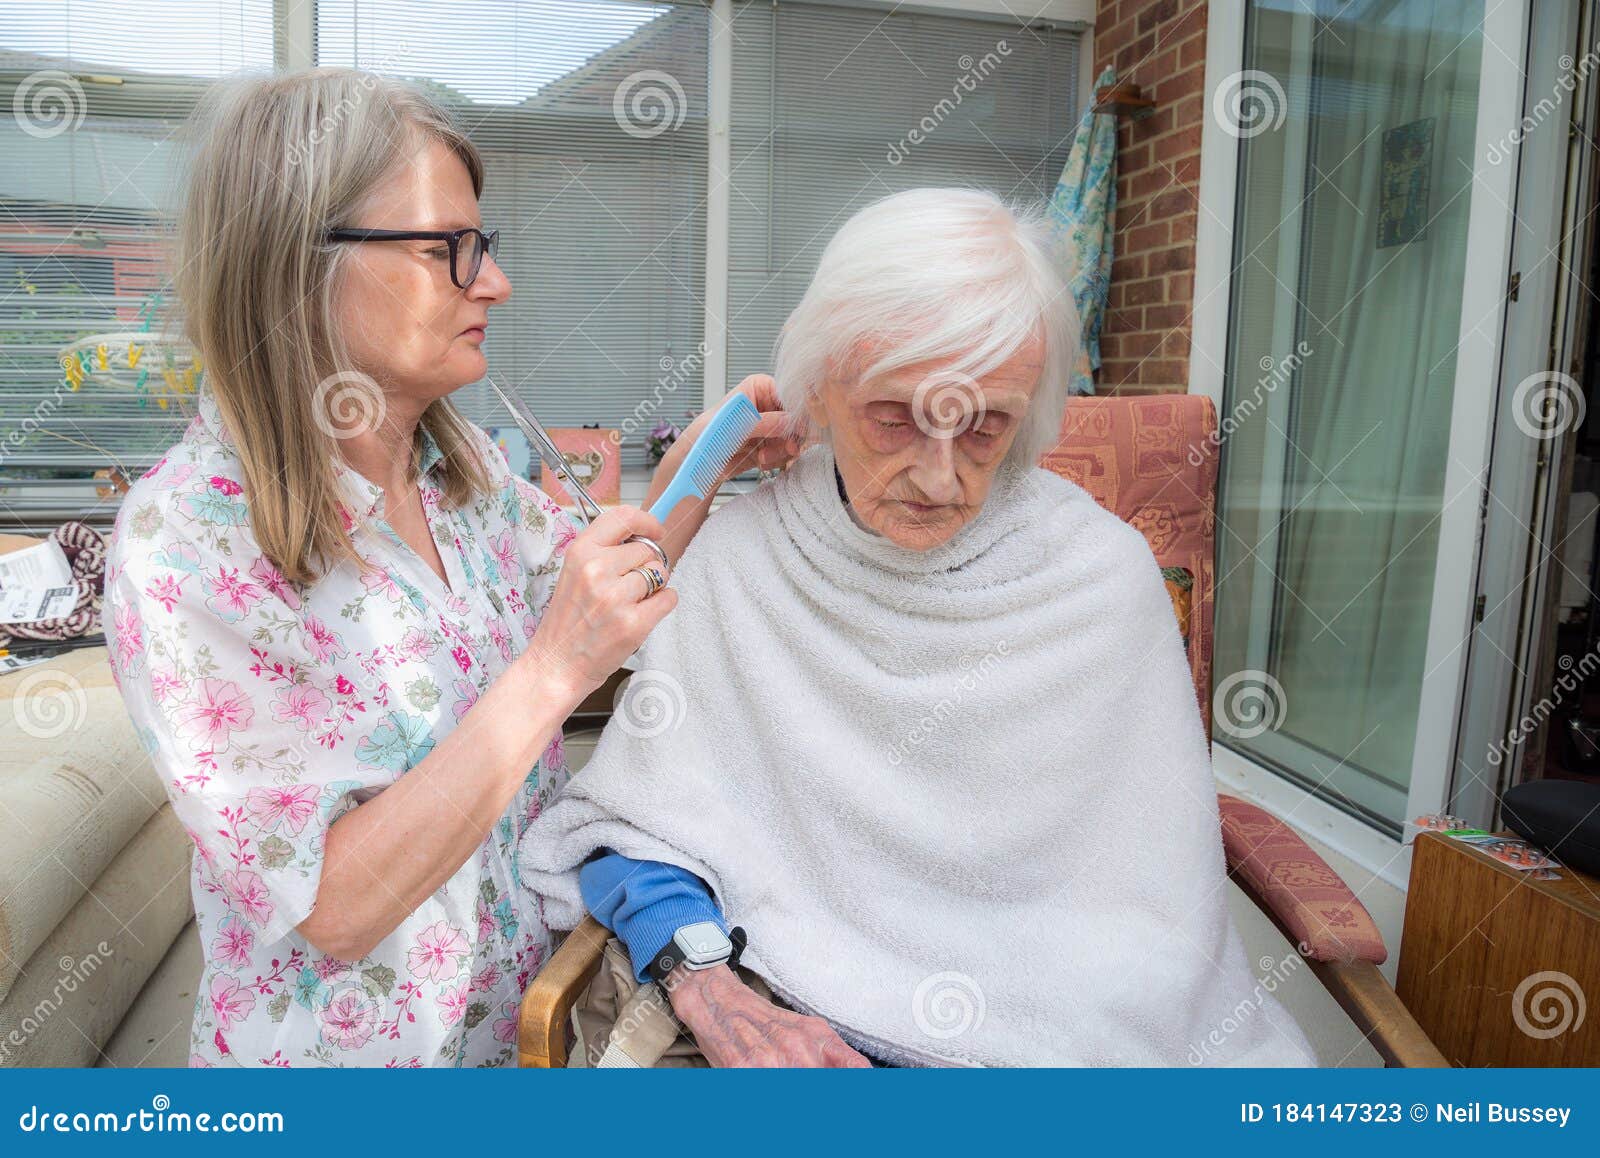 Elderly Woman Has Hair Cut by Her Carer during Corona Virus Lockdown at Home  Stock Image - Image of helping, isolation: 184147323